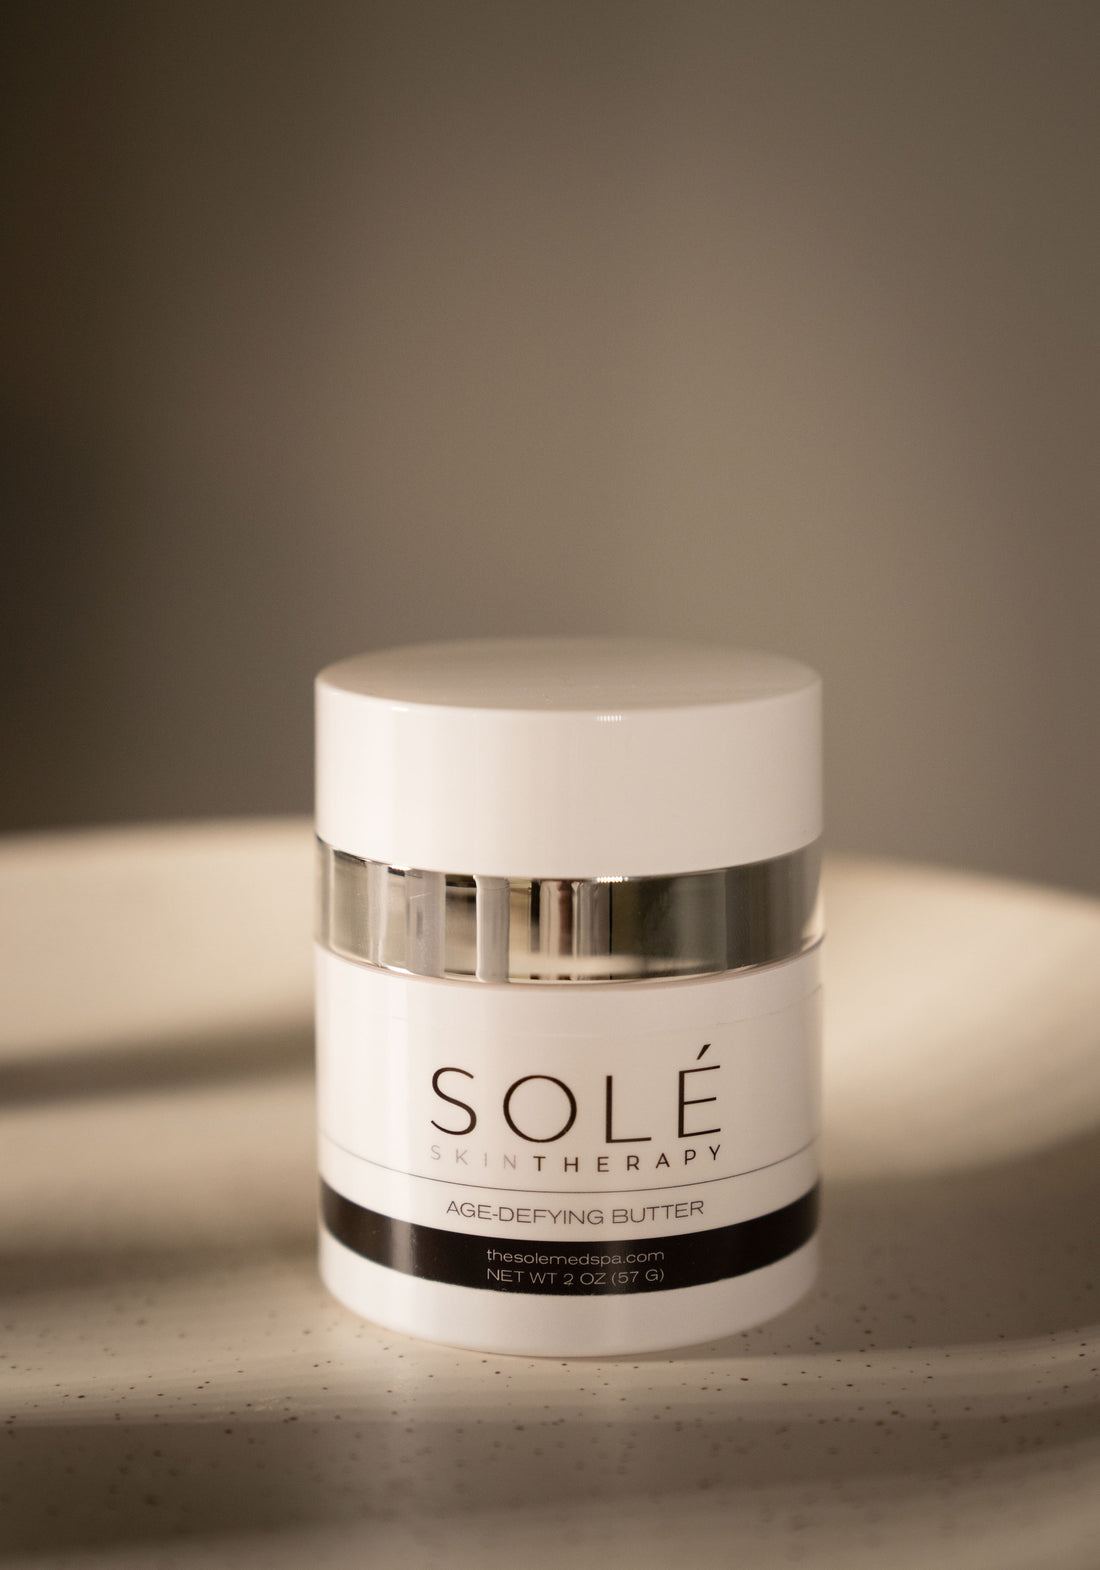 Solé Age-Defying Butter